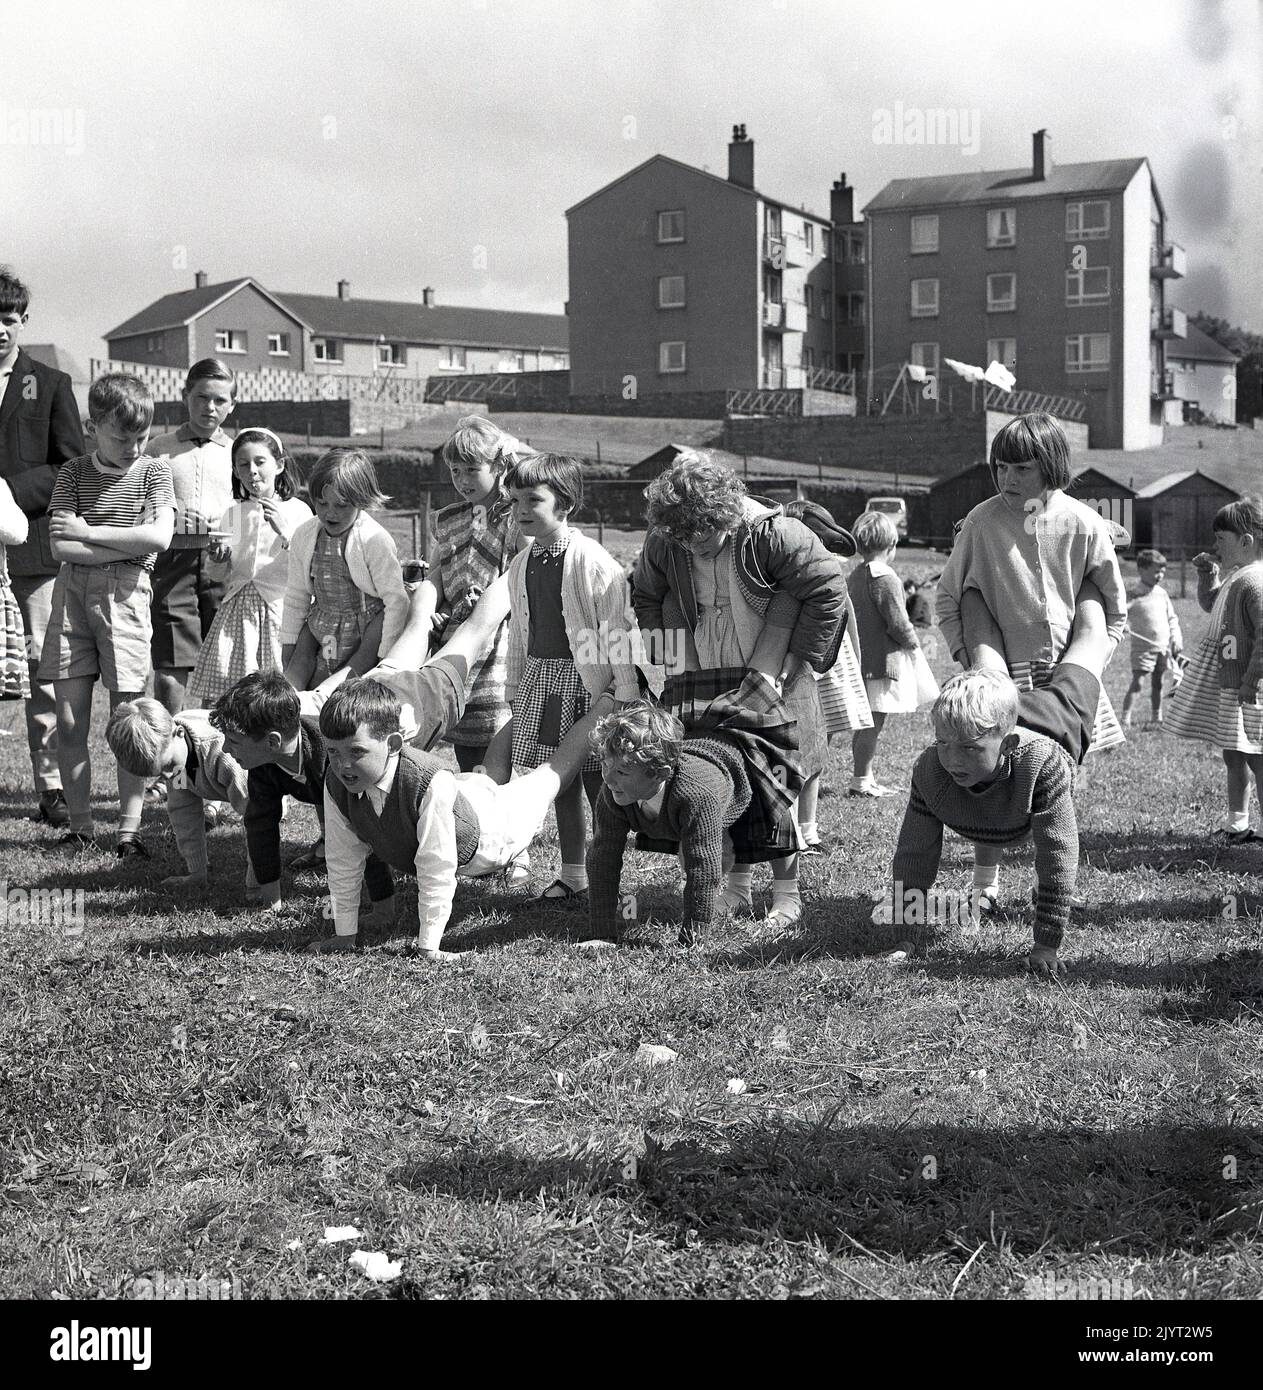 1965, historical, n. queensferry gala day, children ready to start a fun activity, a wheel-barrow race outside on the grass in a field of a housing estate at North Queensferry, Fife, Scotland, UK, the brave young girls holding the boys legs! Stock Photo